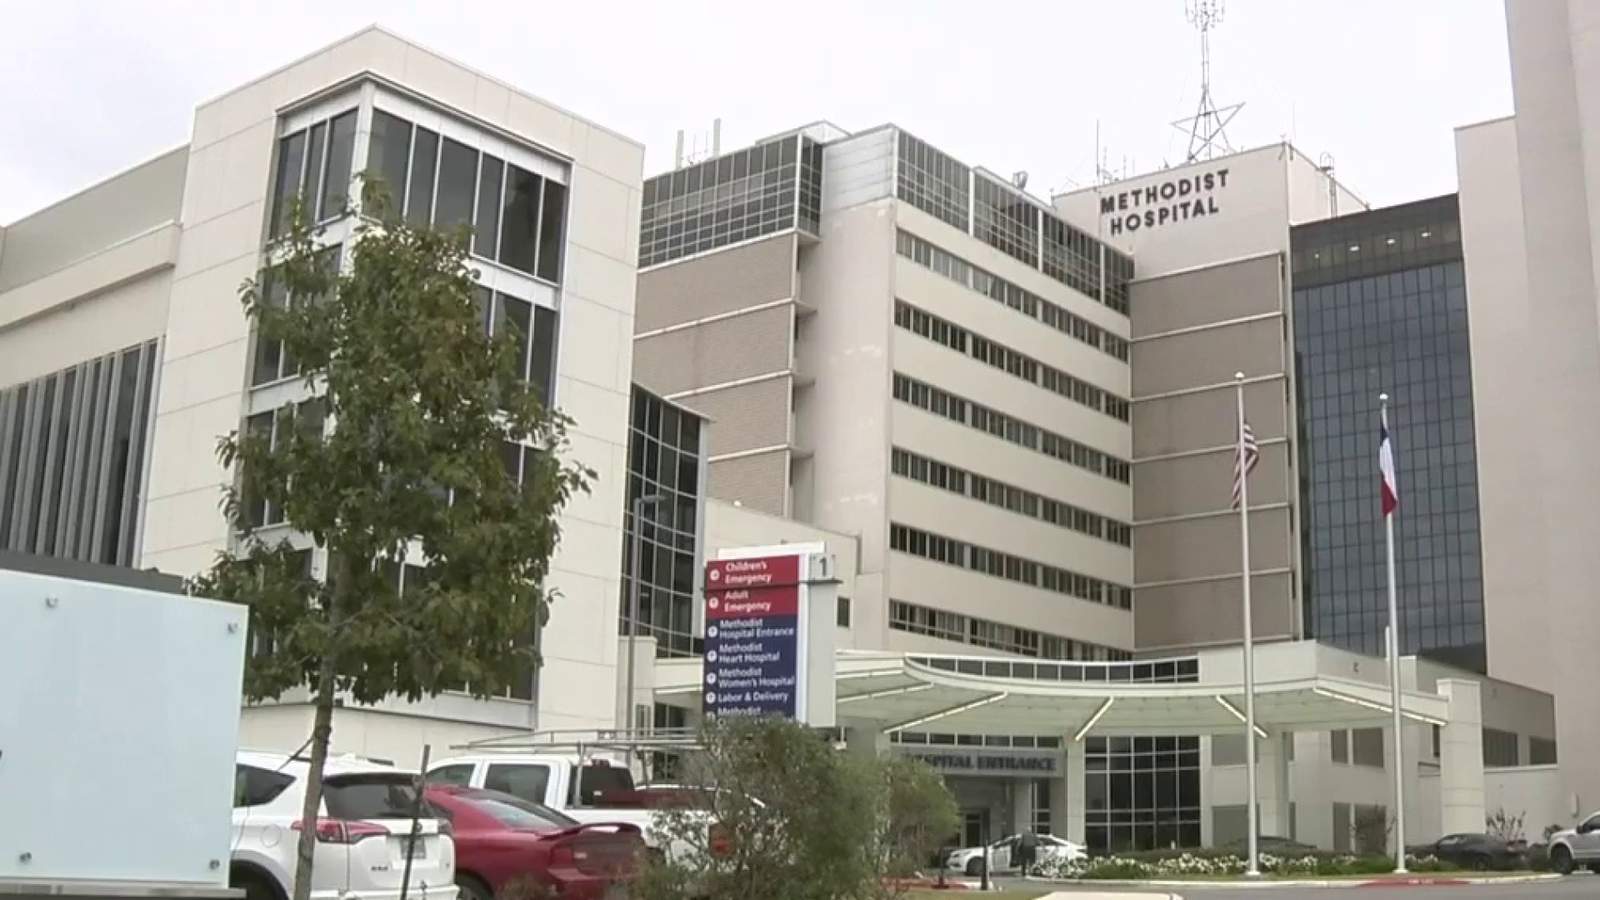 Local hospitals are overwhelmed. Officials say COVID vaccine isn’t an easy fix